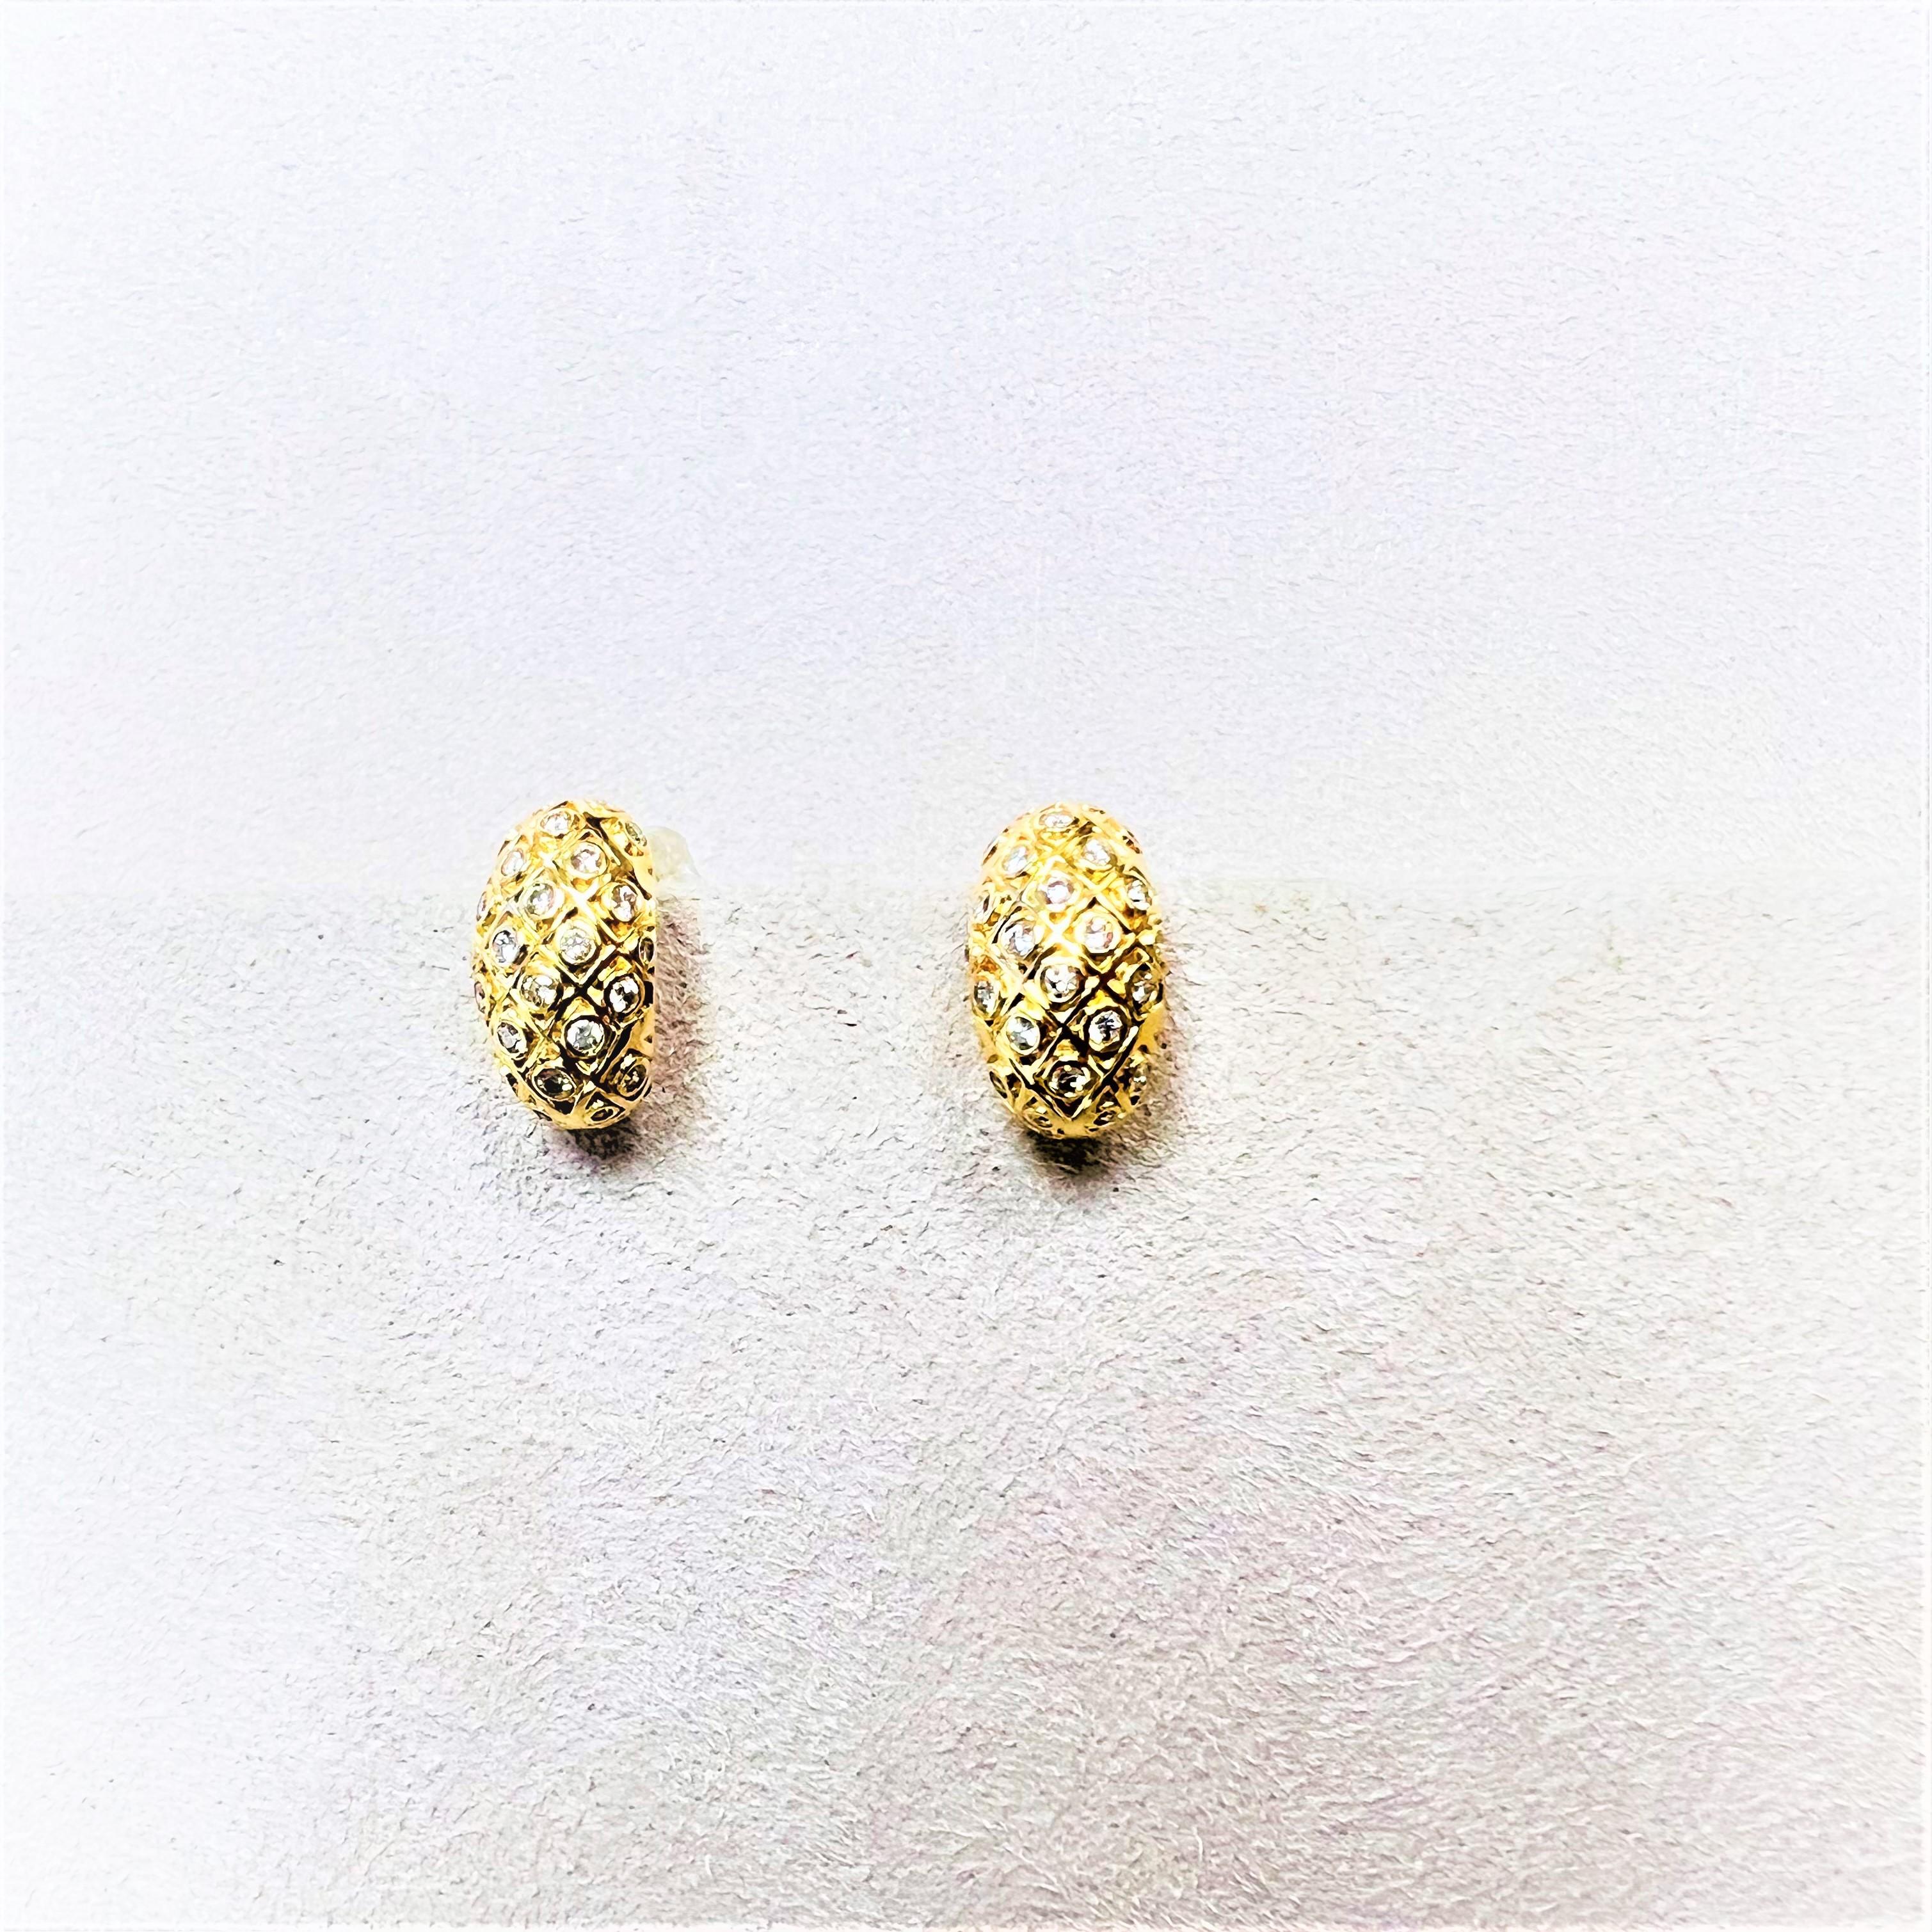 Created in 18 karat yellow gold
Diamonds 0.45 carat approx.
18 kyg butterfly backs
Limited edition

These exquisite Candy Blue Topaz and Lemon Quartz Sugarloaf Earrings bring luxury and sophistication to any ensemble. Crafted in 18 karat yellow gold